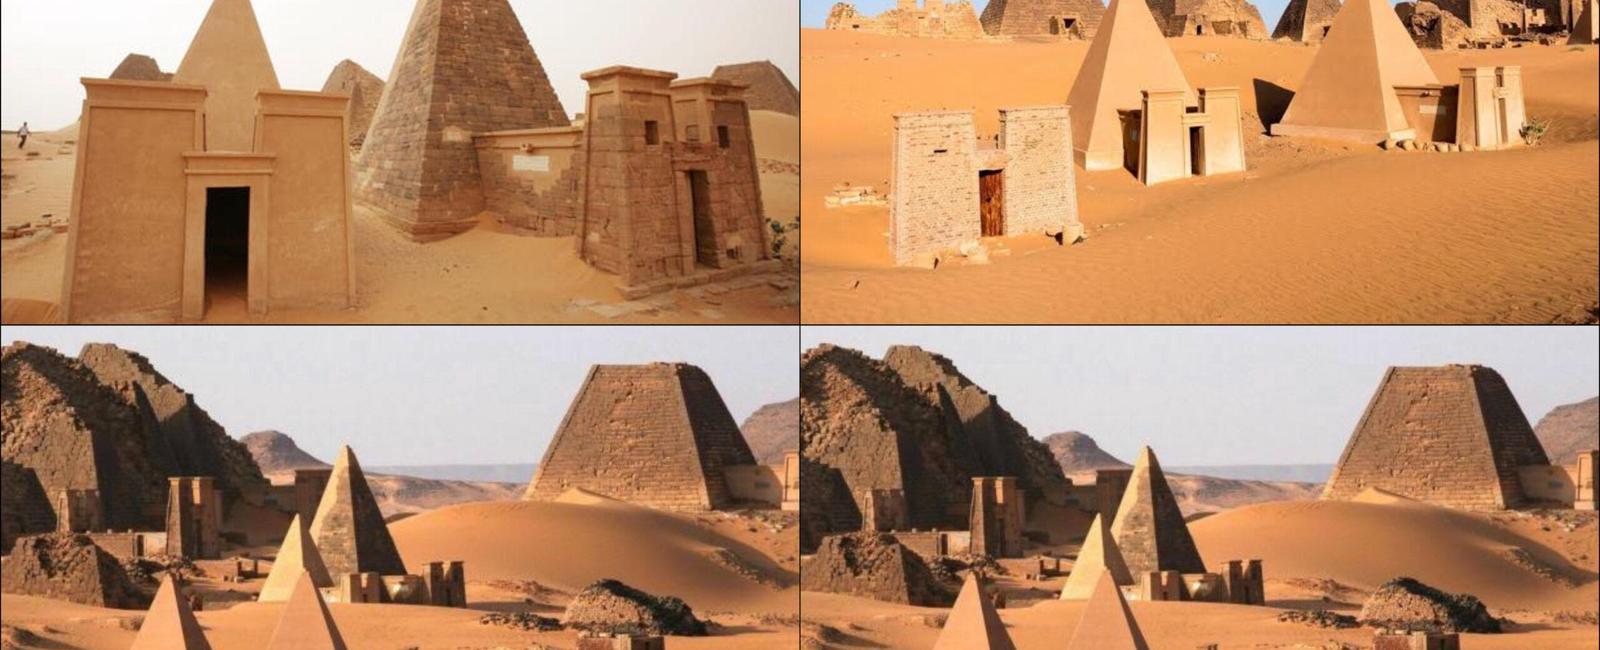 Sudan has more than 200 pyramids more than the number of pyramids found in egypt